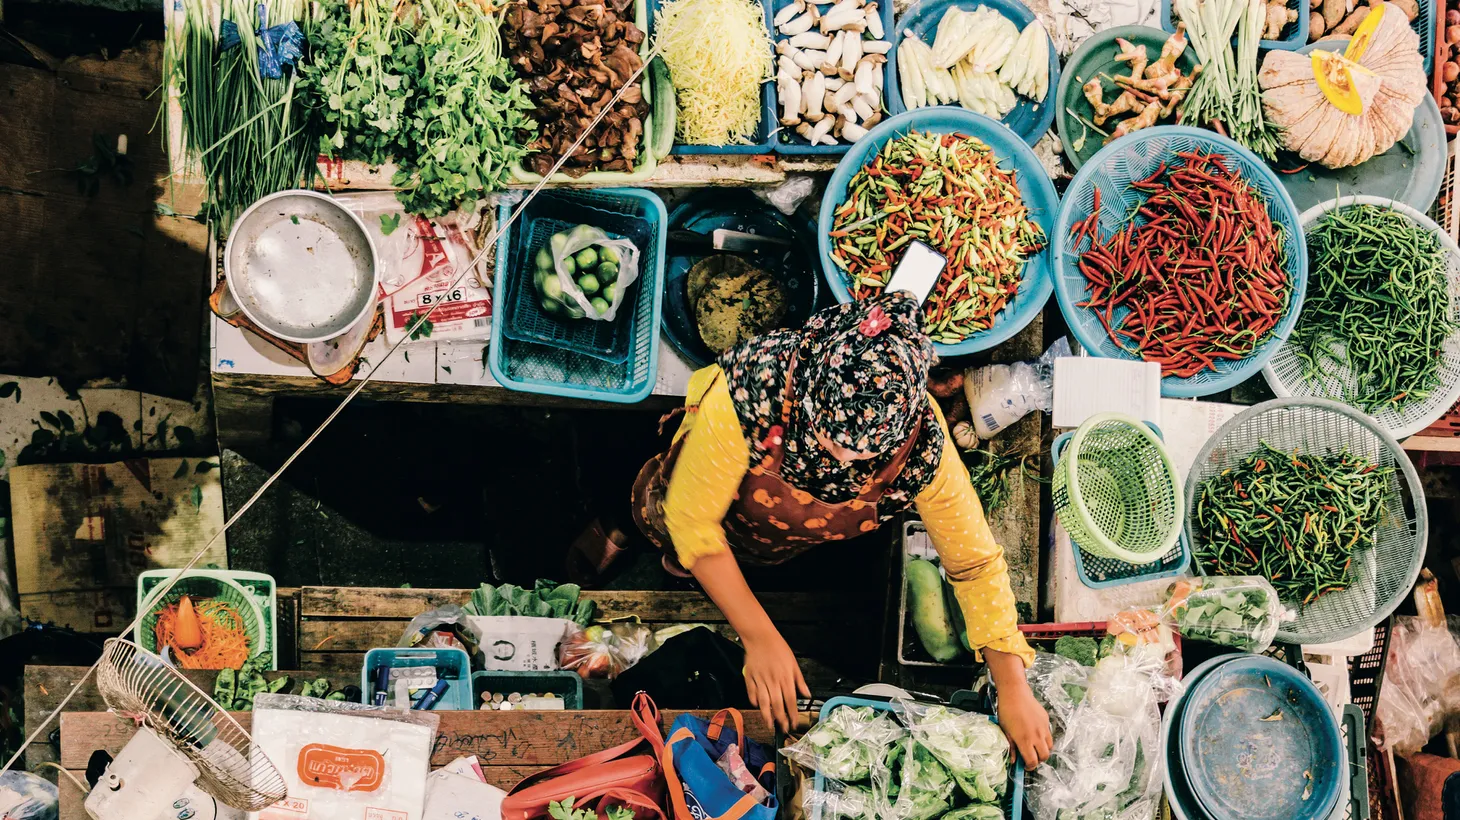 A woman sells vegetables in Southern Thailand.